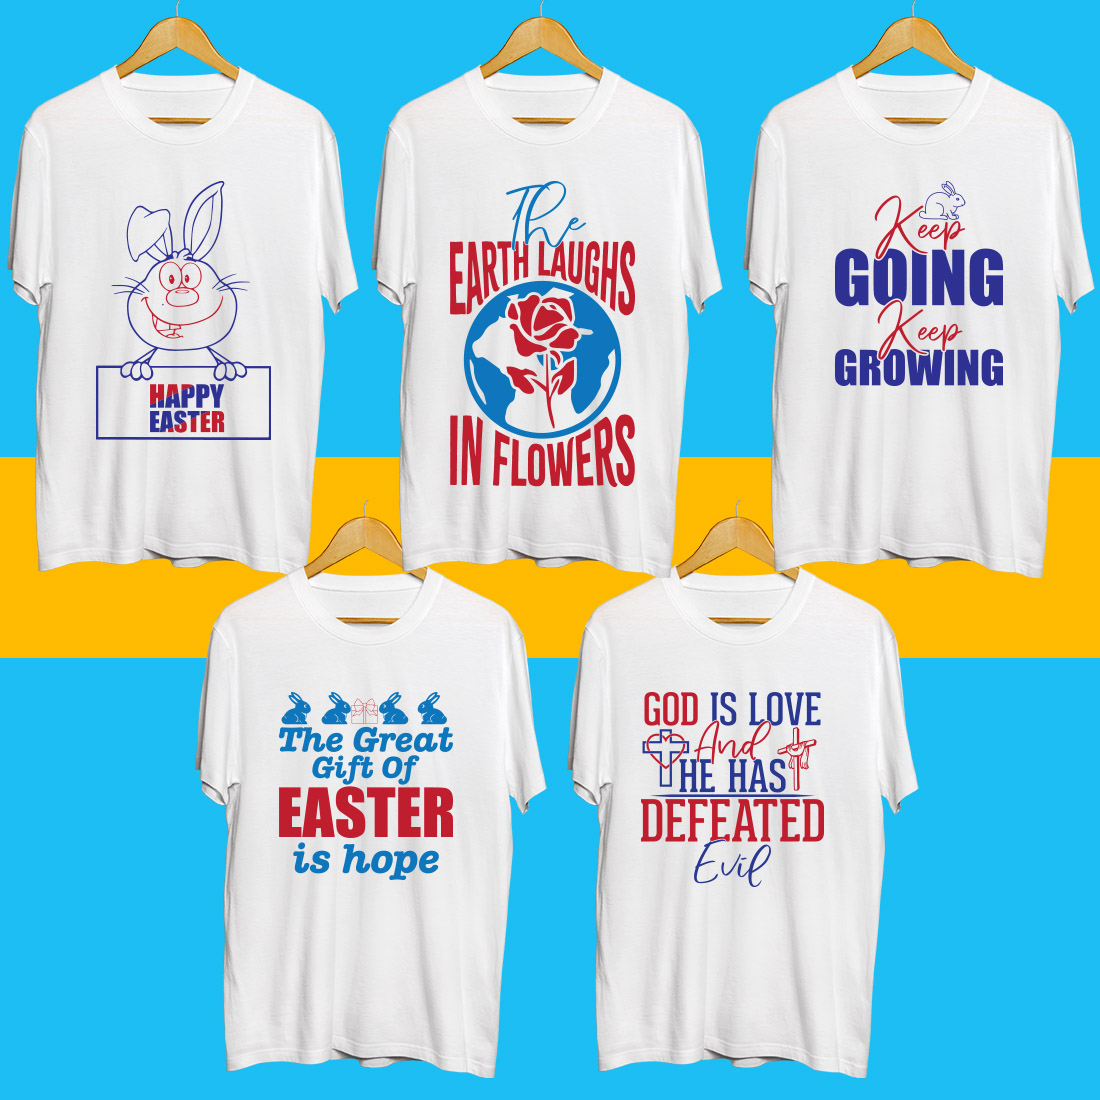 Easter Day T Shirt Bundle cover image.